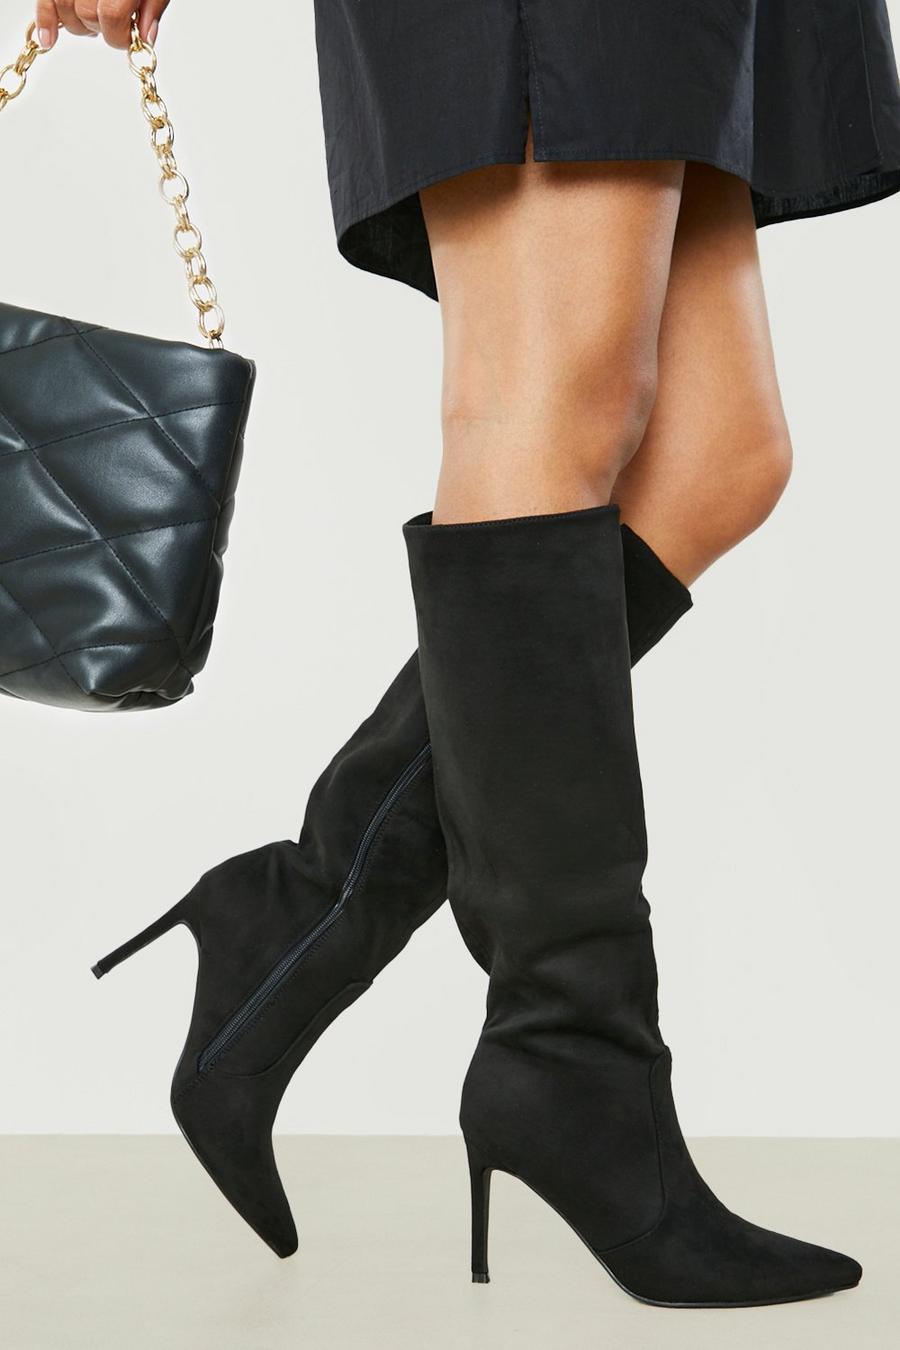 Black Pointed Toe Knee High Boots